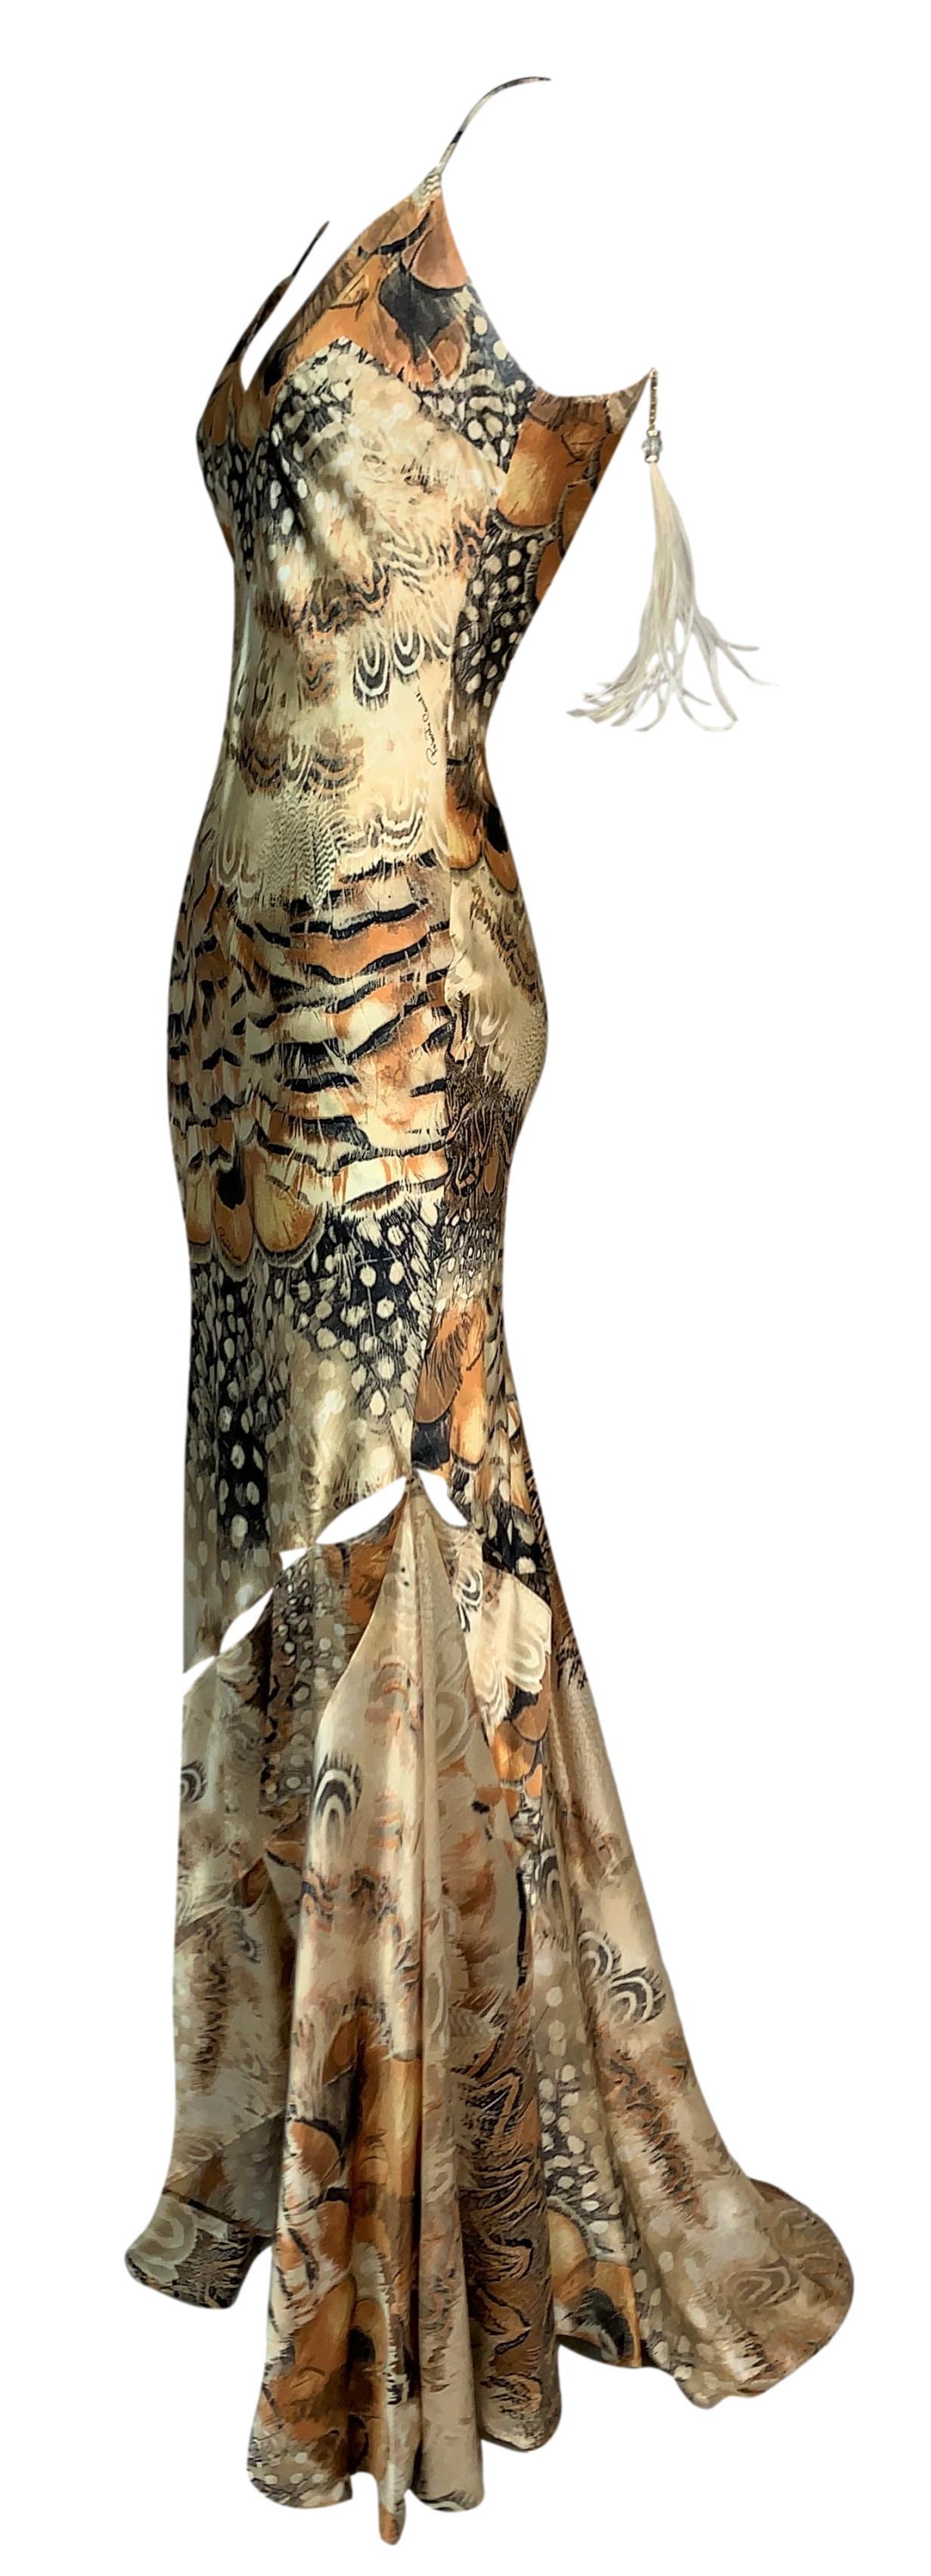 DESIGNER: S/S 2004 Roberto Cavalli

Please contact us for more images or information

CONDITION: Pristine/Unworn

FABRIC: Silk

COUNTRY: Italy

SIZE: M

MEASUREMENTS; provided as a courtesy only- not a guarantee of fit: 

Chest: 34-37